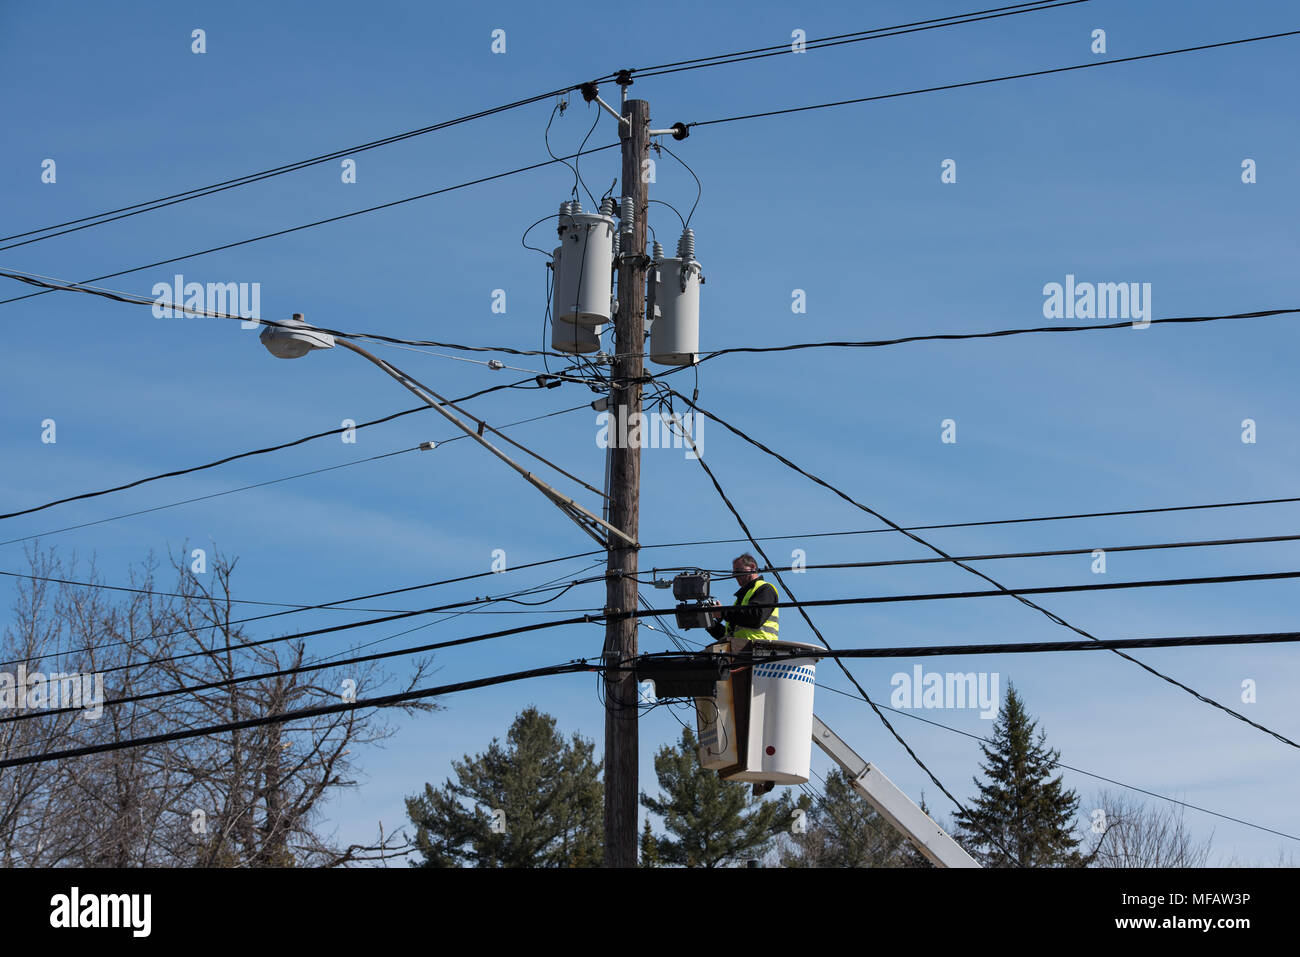 Man working on wires while standing in an aerial work platform, or lift bucket or bucket truck with a deep blue background. Stock Photo